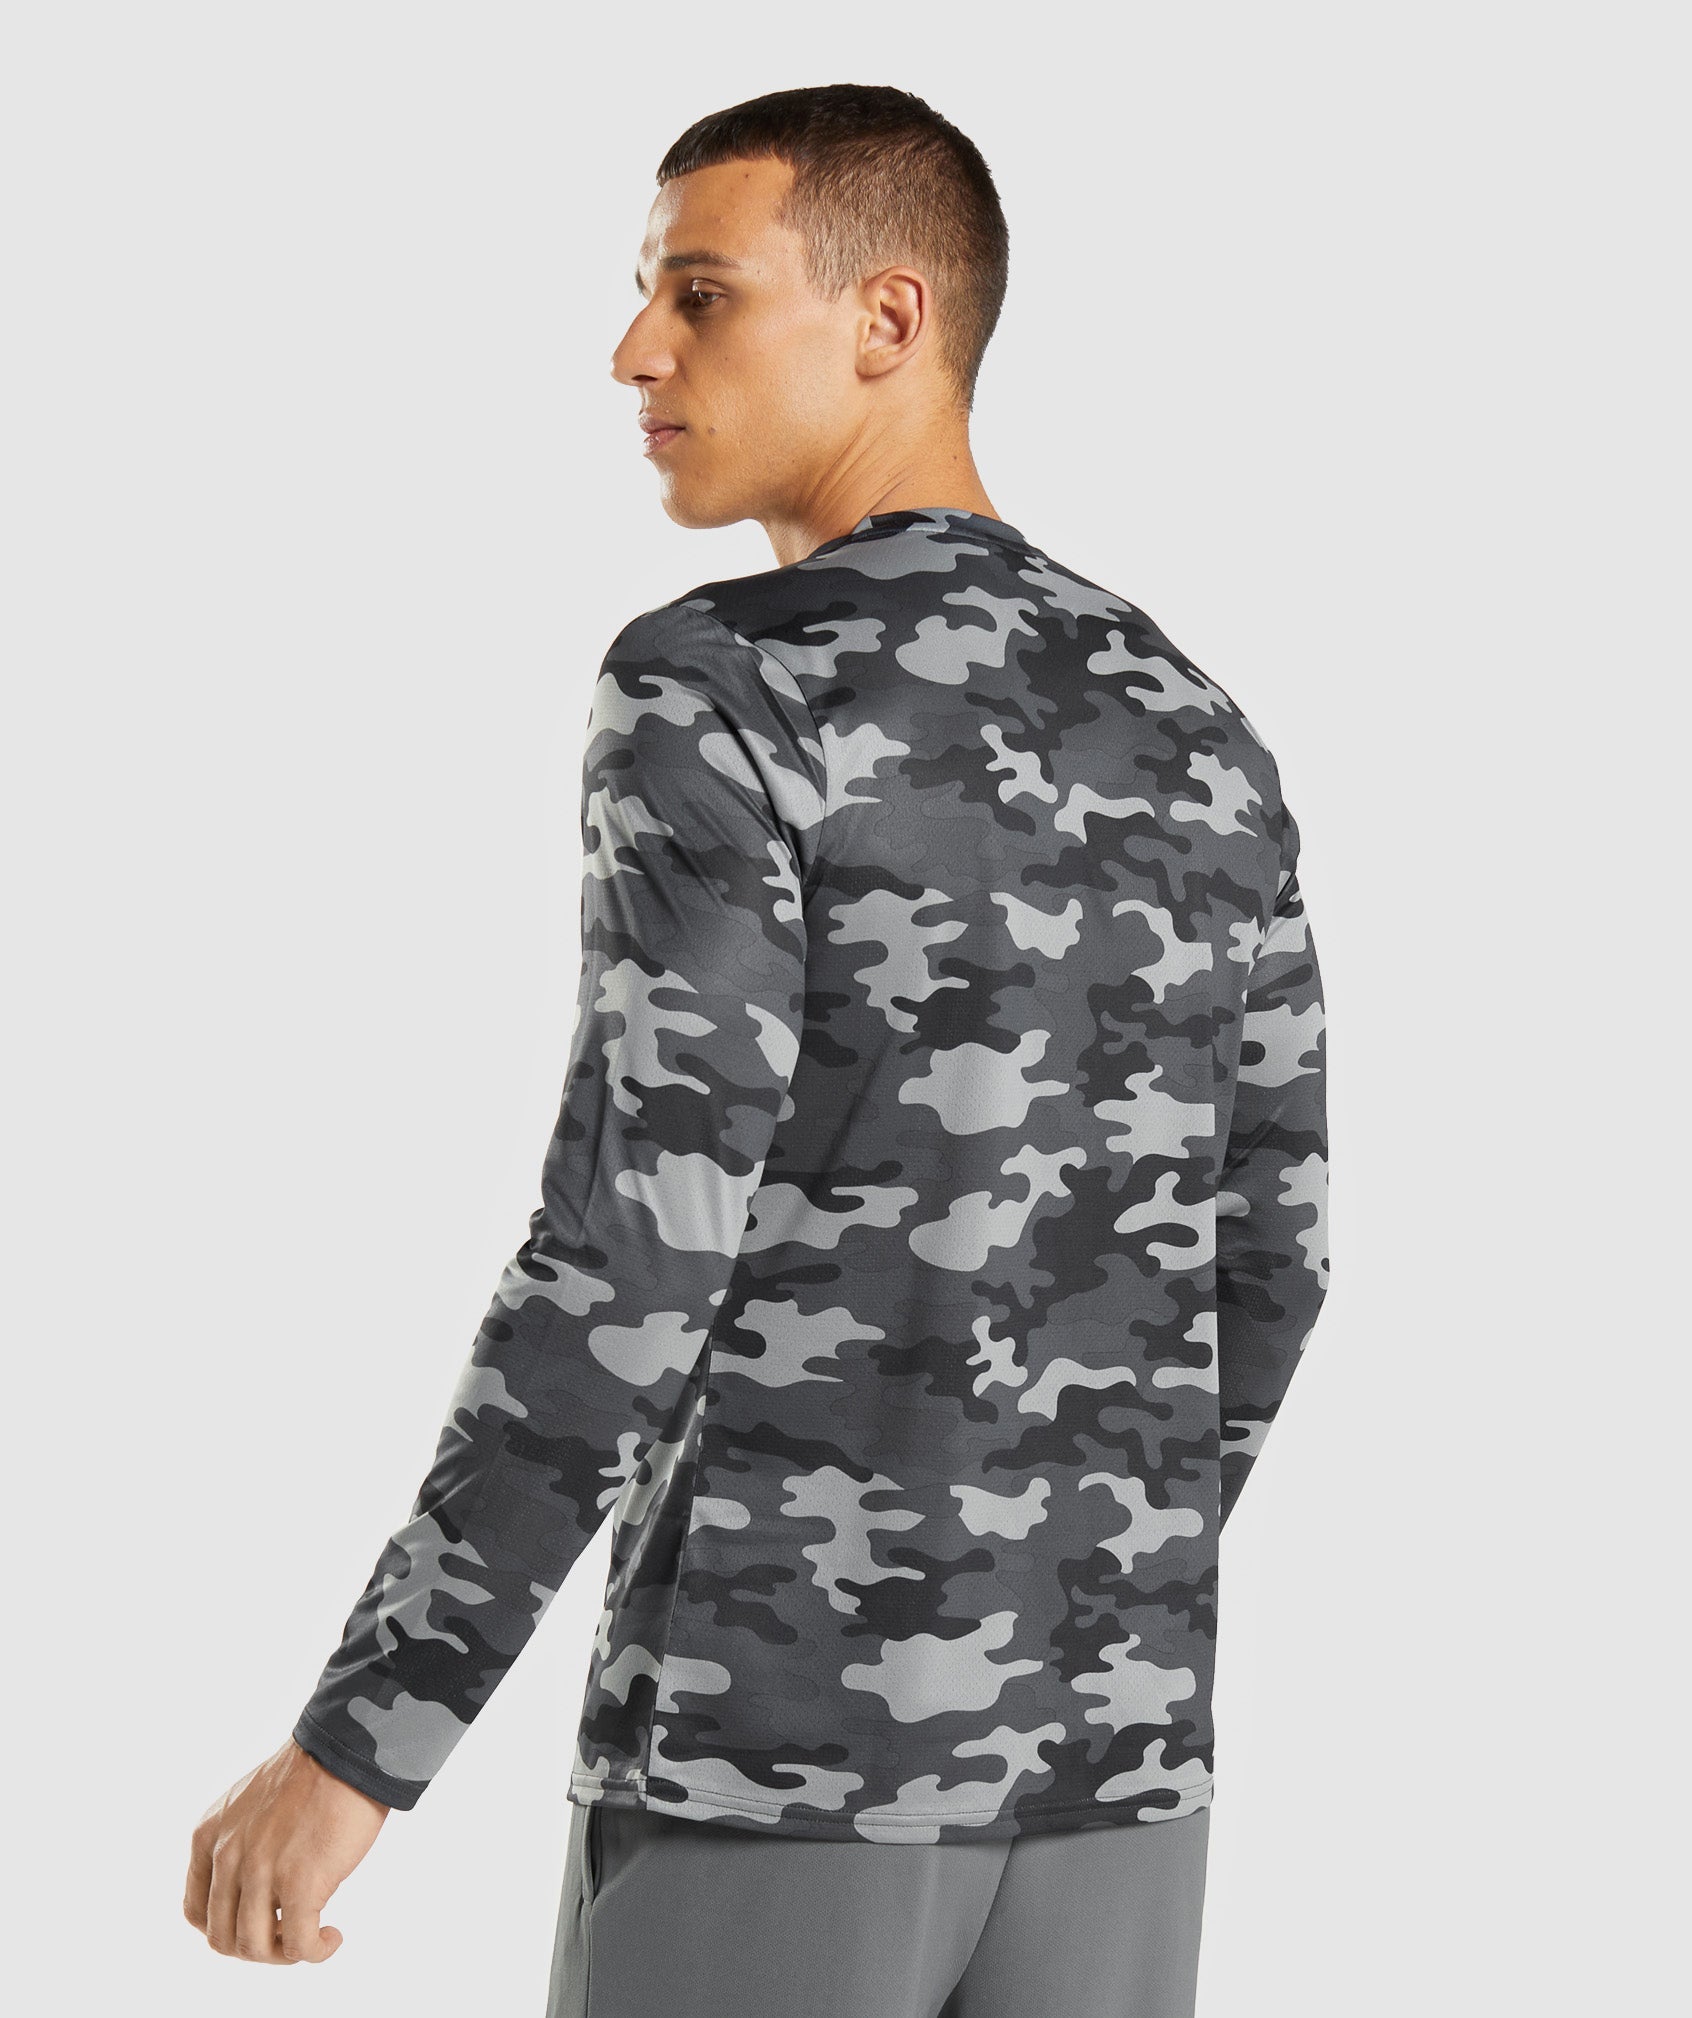 Arrival Long Sleeve T-Shirt in Grey Print